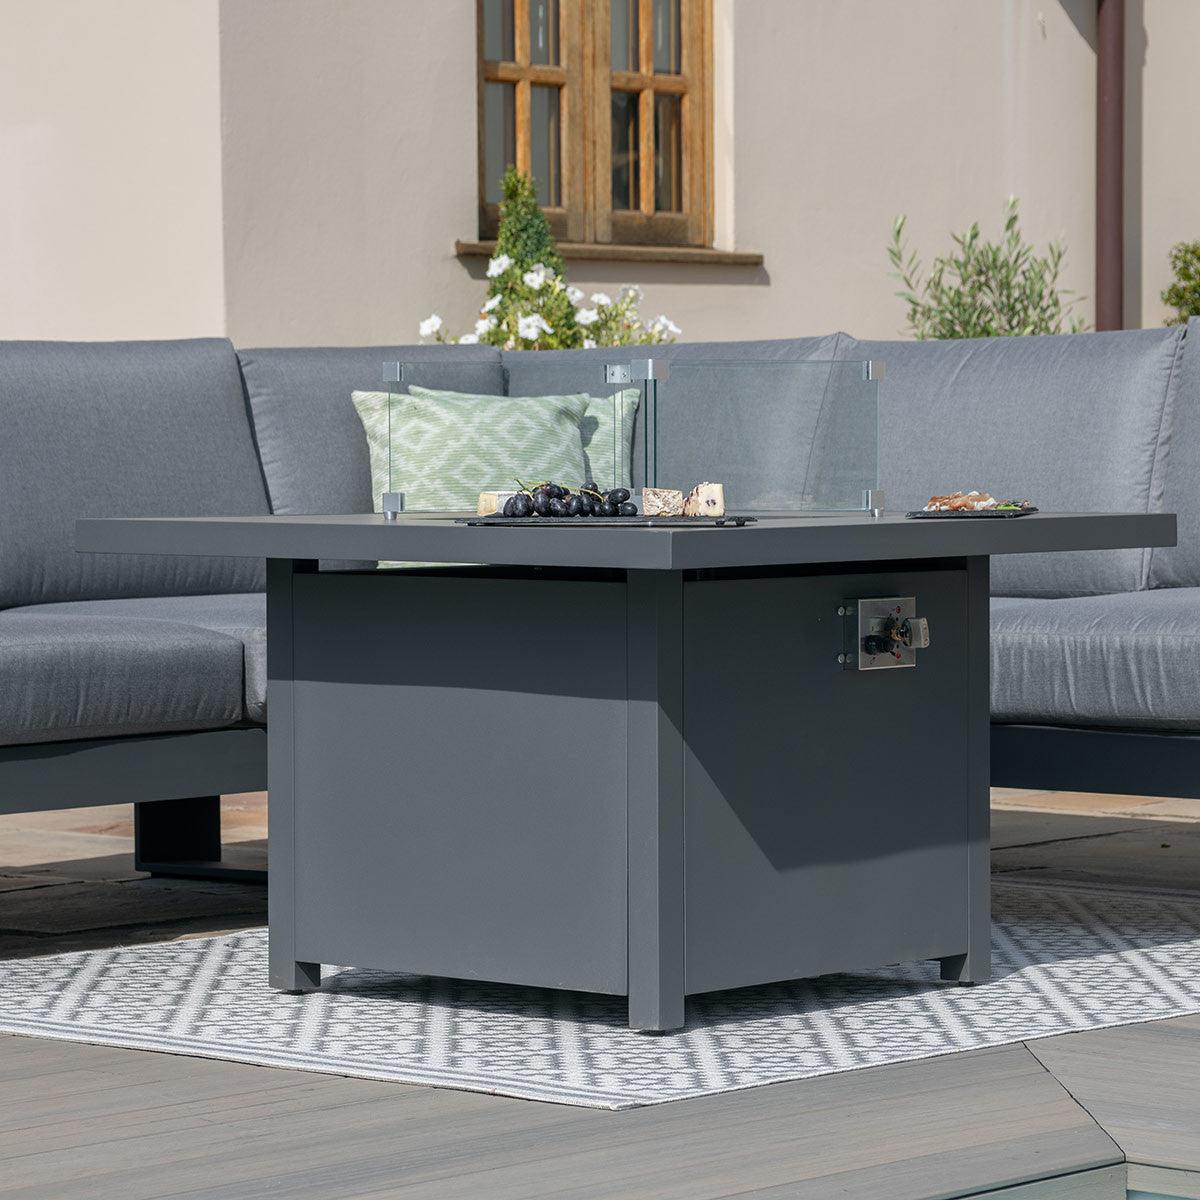 Amalfi Small Corner Group With Fire Pit Table - Vookoo Lifestyle